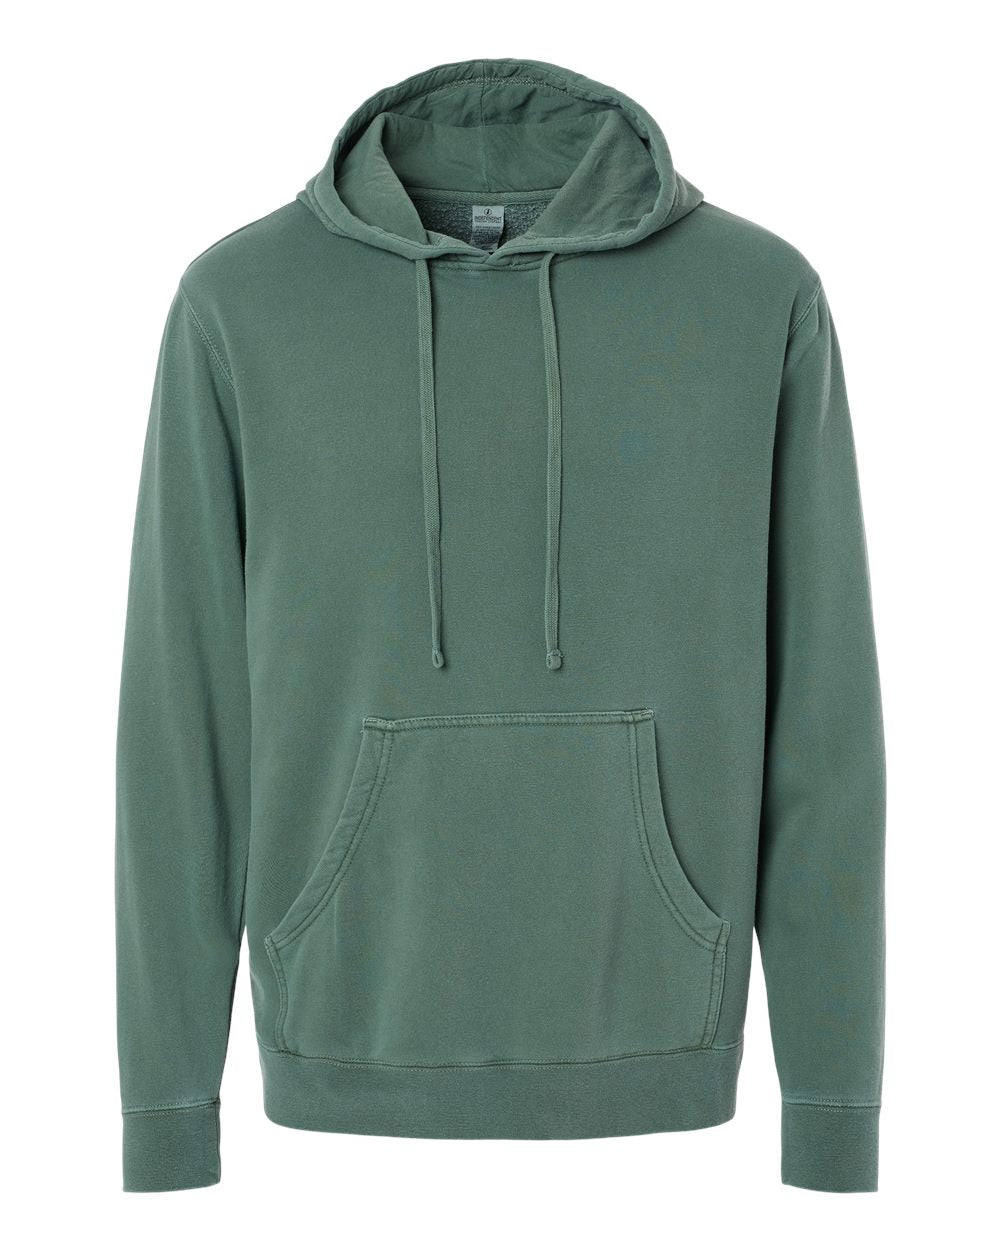 Independent Pigment-Dyed Hoodie (PRM4500) in Pigment Alpine Green